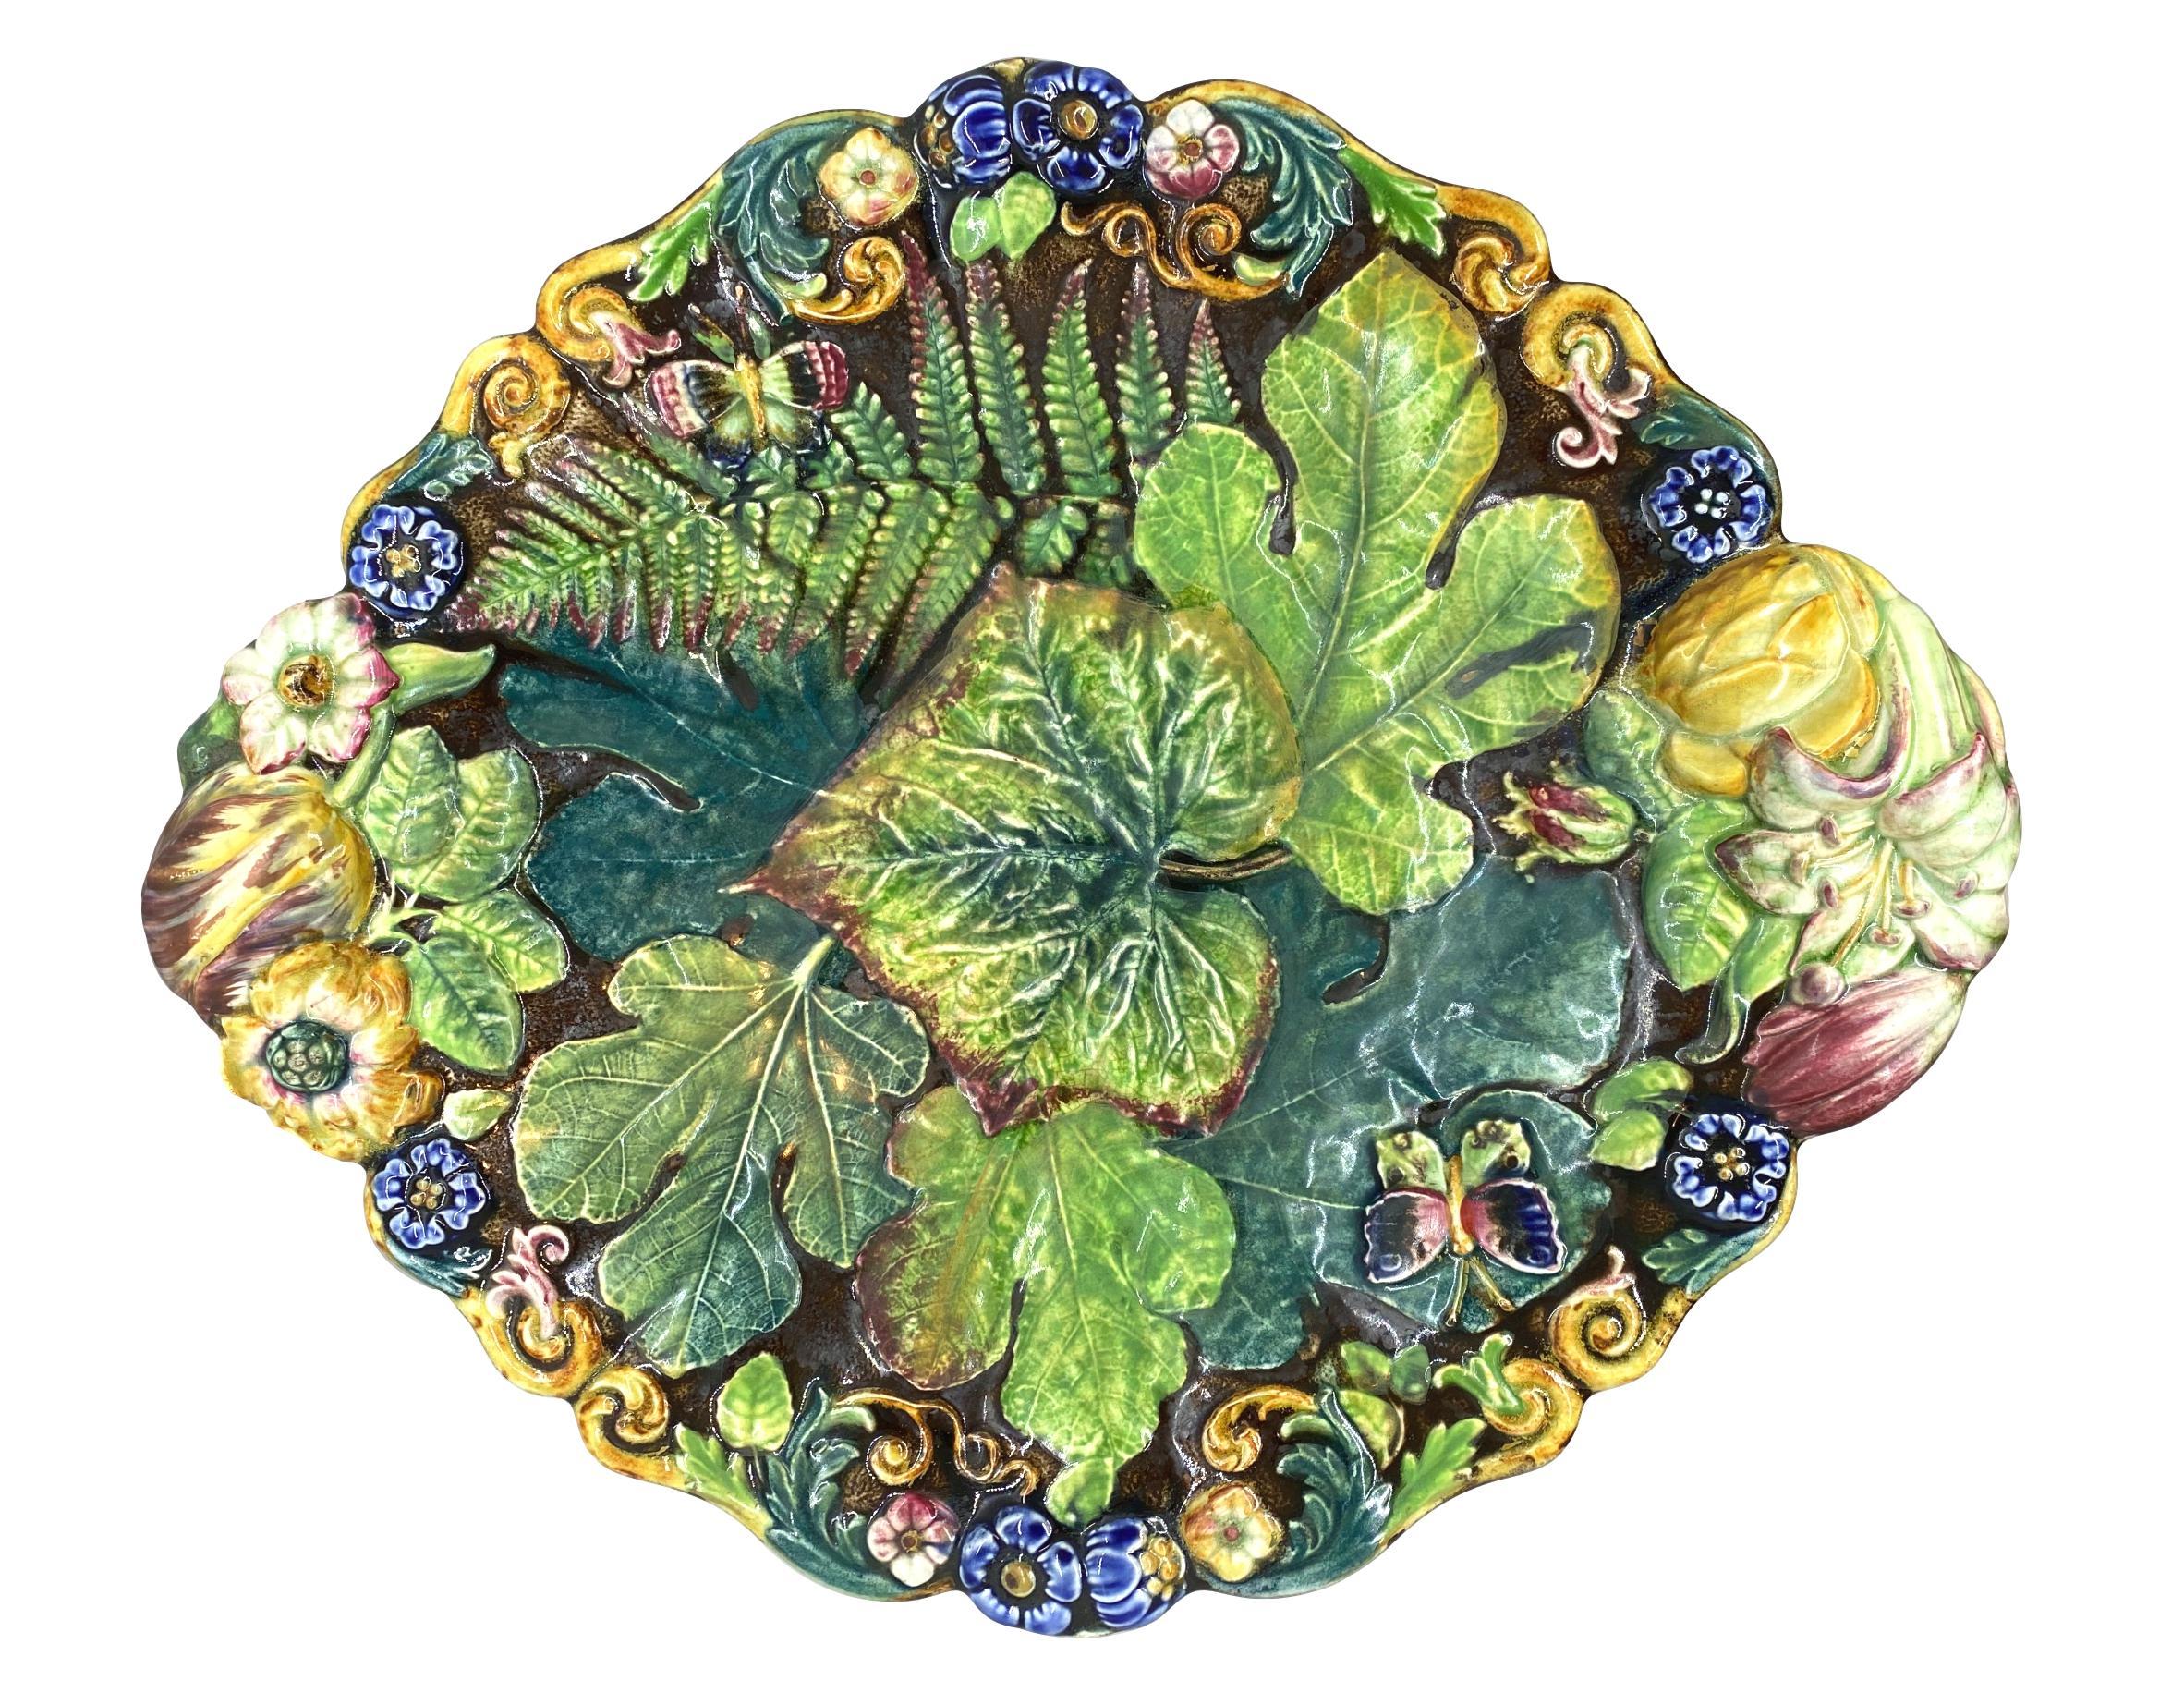 Samuel Alcock Majolica botanical large compote, English, circa 1875. This rare design is one of the most beautiful and sought after ever produced in majolica, a first-rate connoisseur example of the best English Majolica.
This design by Samuel